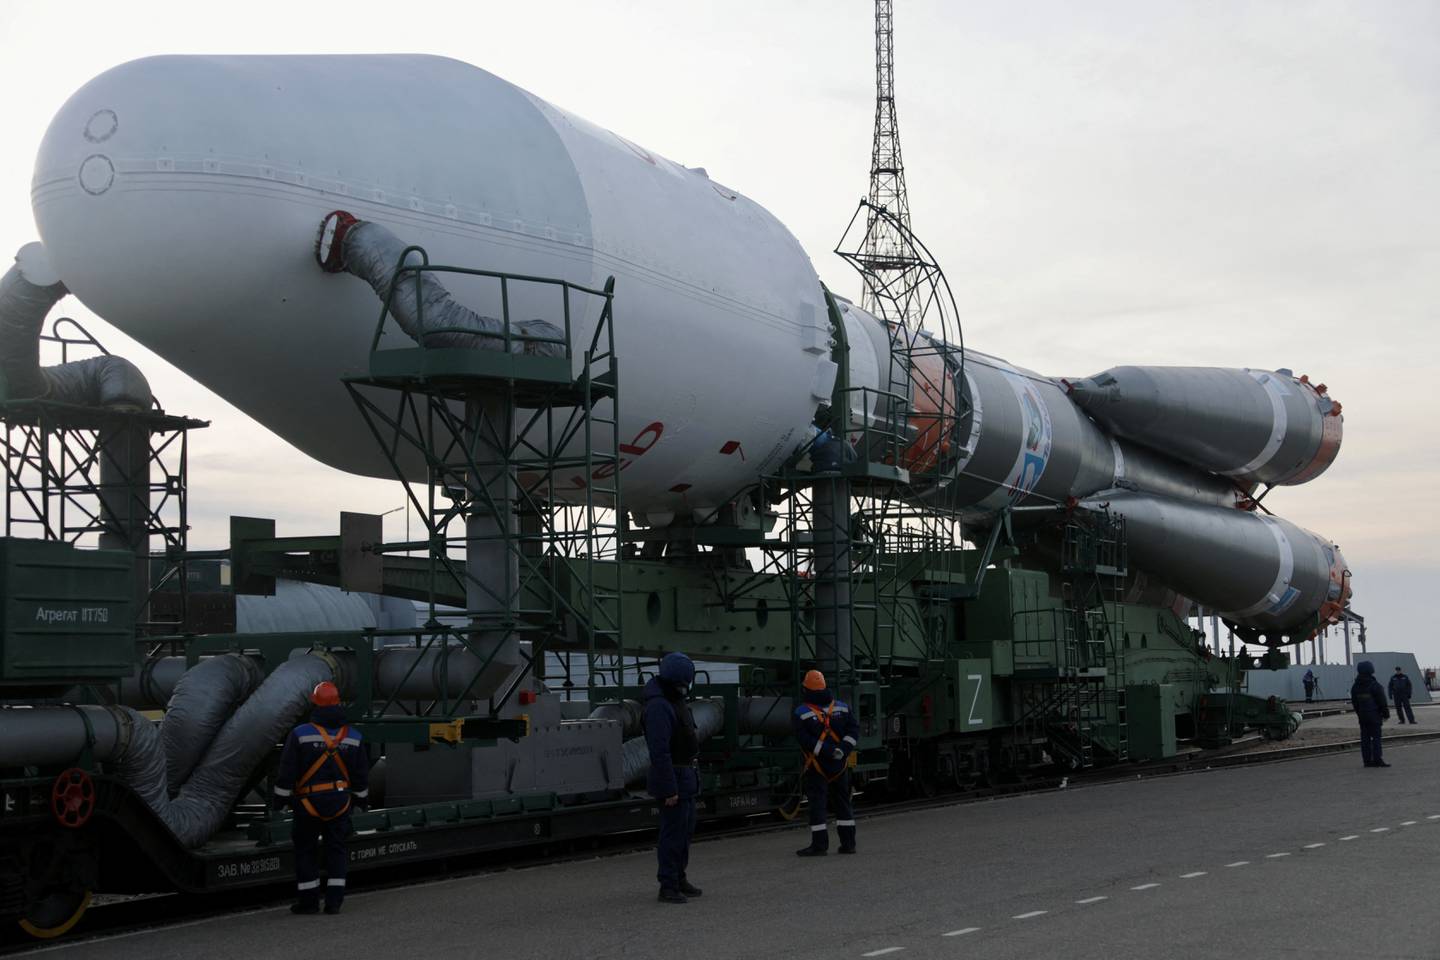 A Soyuz rocket with the satellites of British start-up OneWeb is removed from a launch pad at the Baikonur Cosmodrome in Kazakhstan on March 4, 2022. Reuters